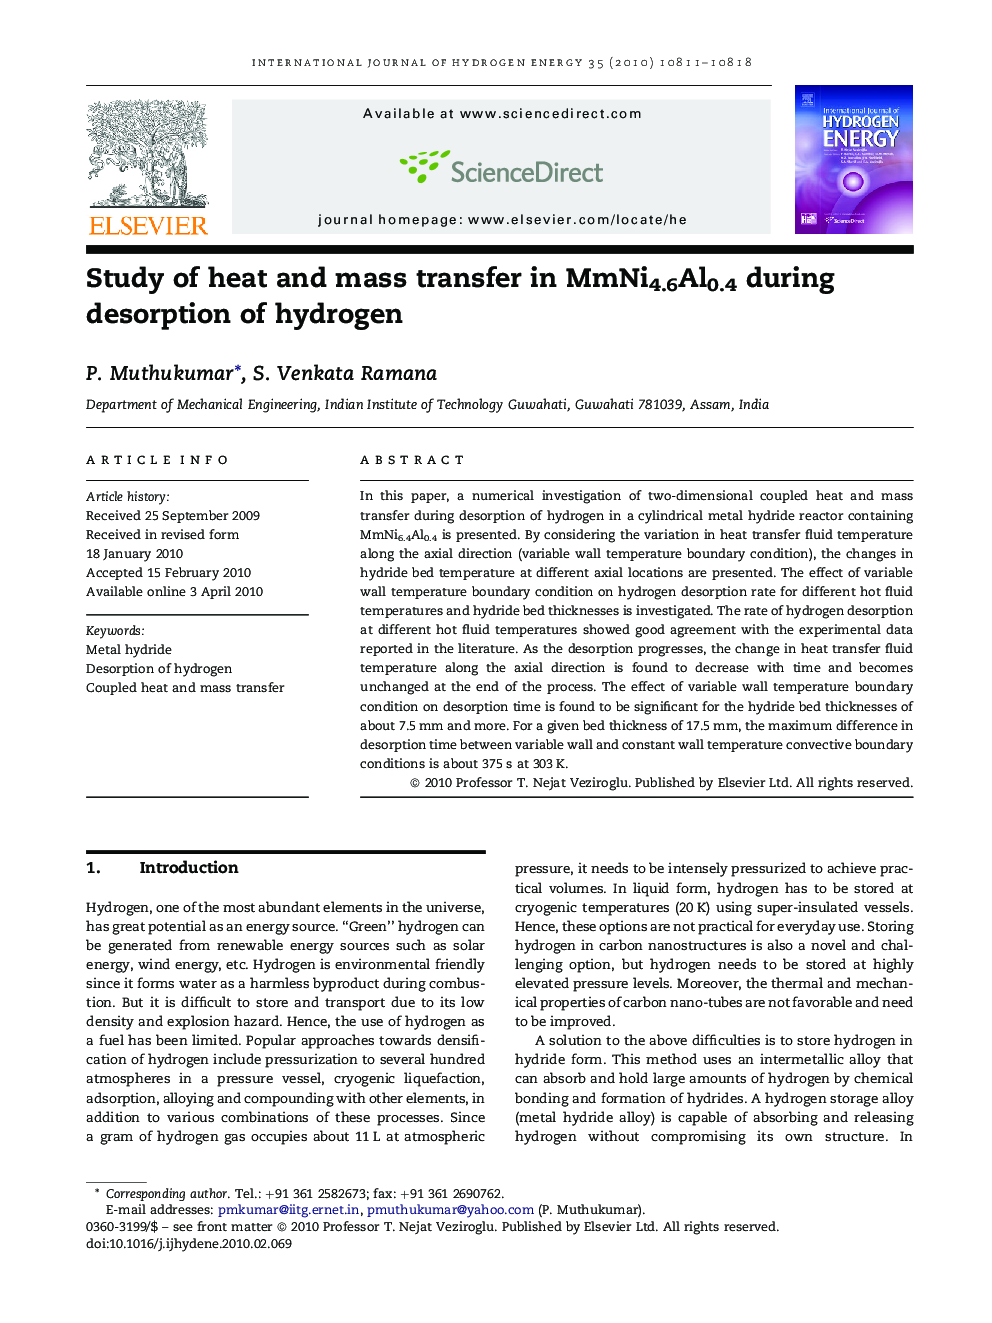 Study of heat and mass transfer in MmNi4.6Al0.4 during desorption of hydrogen